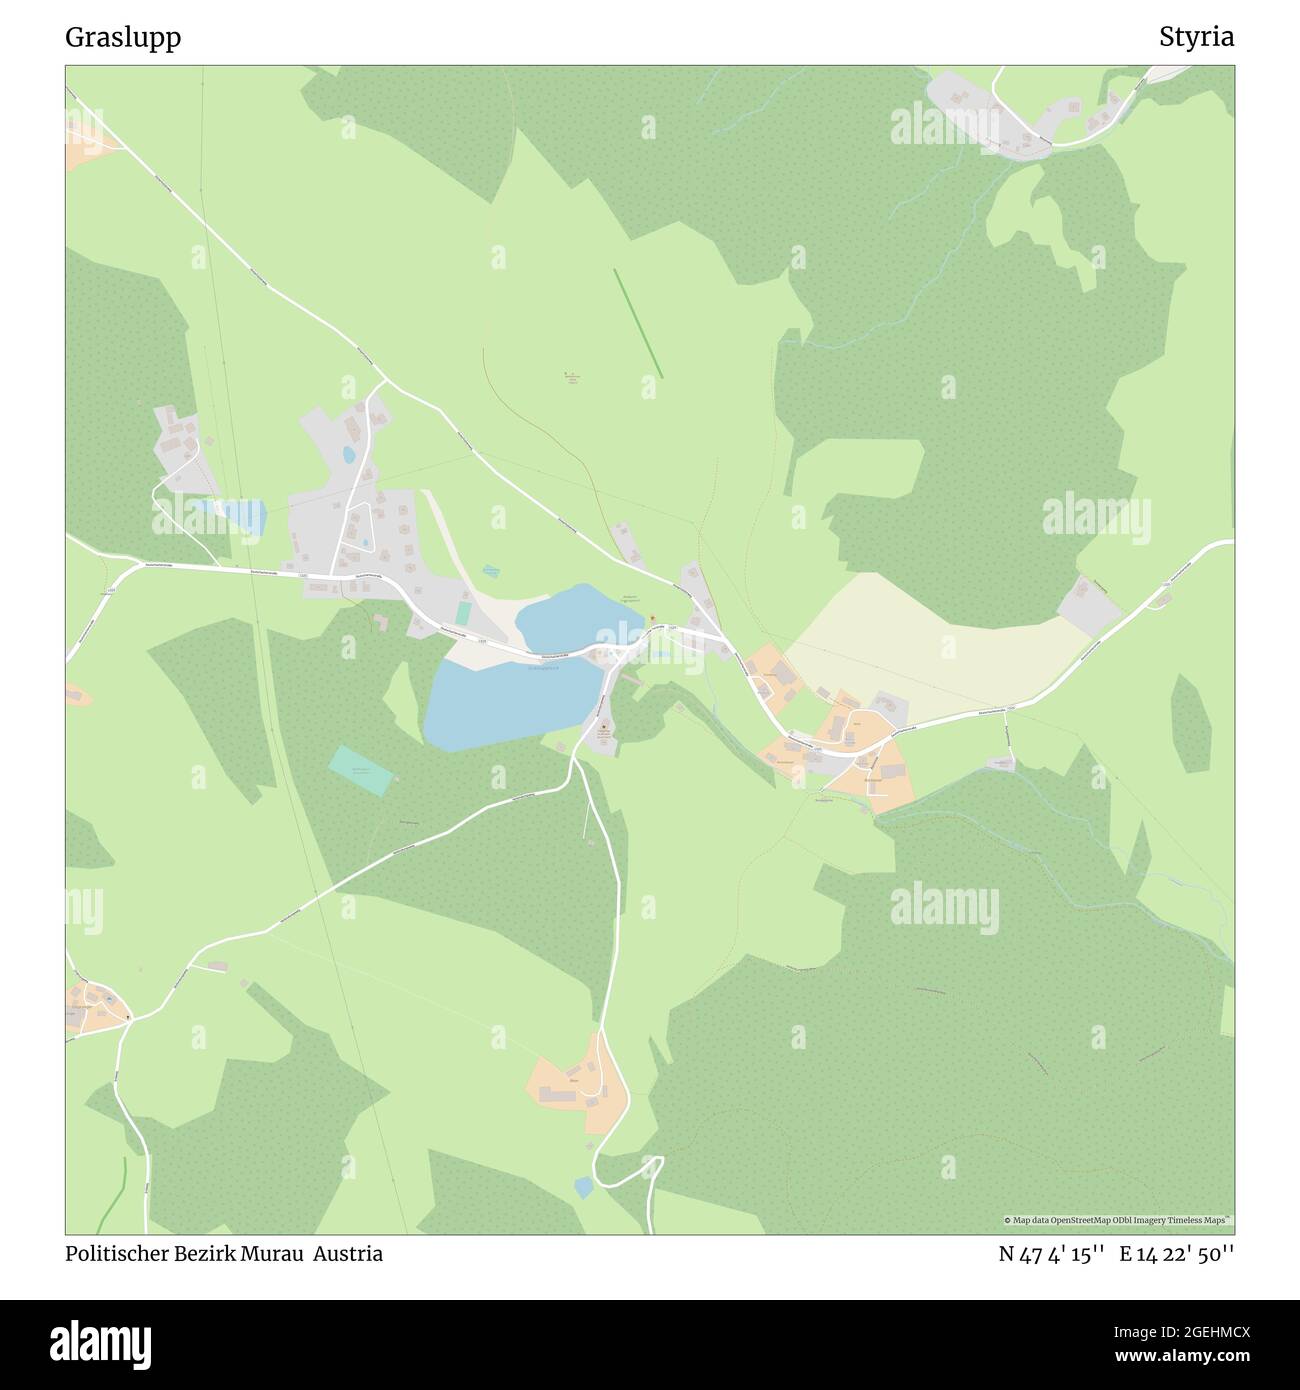 Graslupp, Politischer Bezirk Murau, Austria, Styria, N 47 4' 15'', E 14 22' 50'', map, Timeless Map published in 2021. Travelers, explorers and adventurers like Florence Nightingale, David Livingstone, Ernest Shackleton, Lewis and Clark and Sherlock Holmes relied on maps to plan travels to the world's most remote corners, Timeless Maps is mapping most locations on the globe, showing the achievement of great dreams Stock Photo